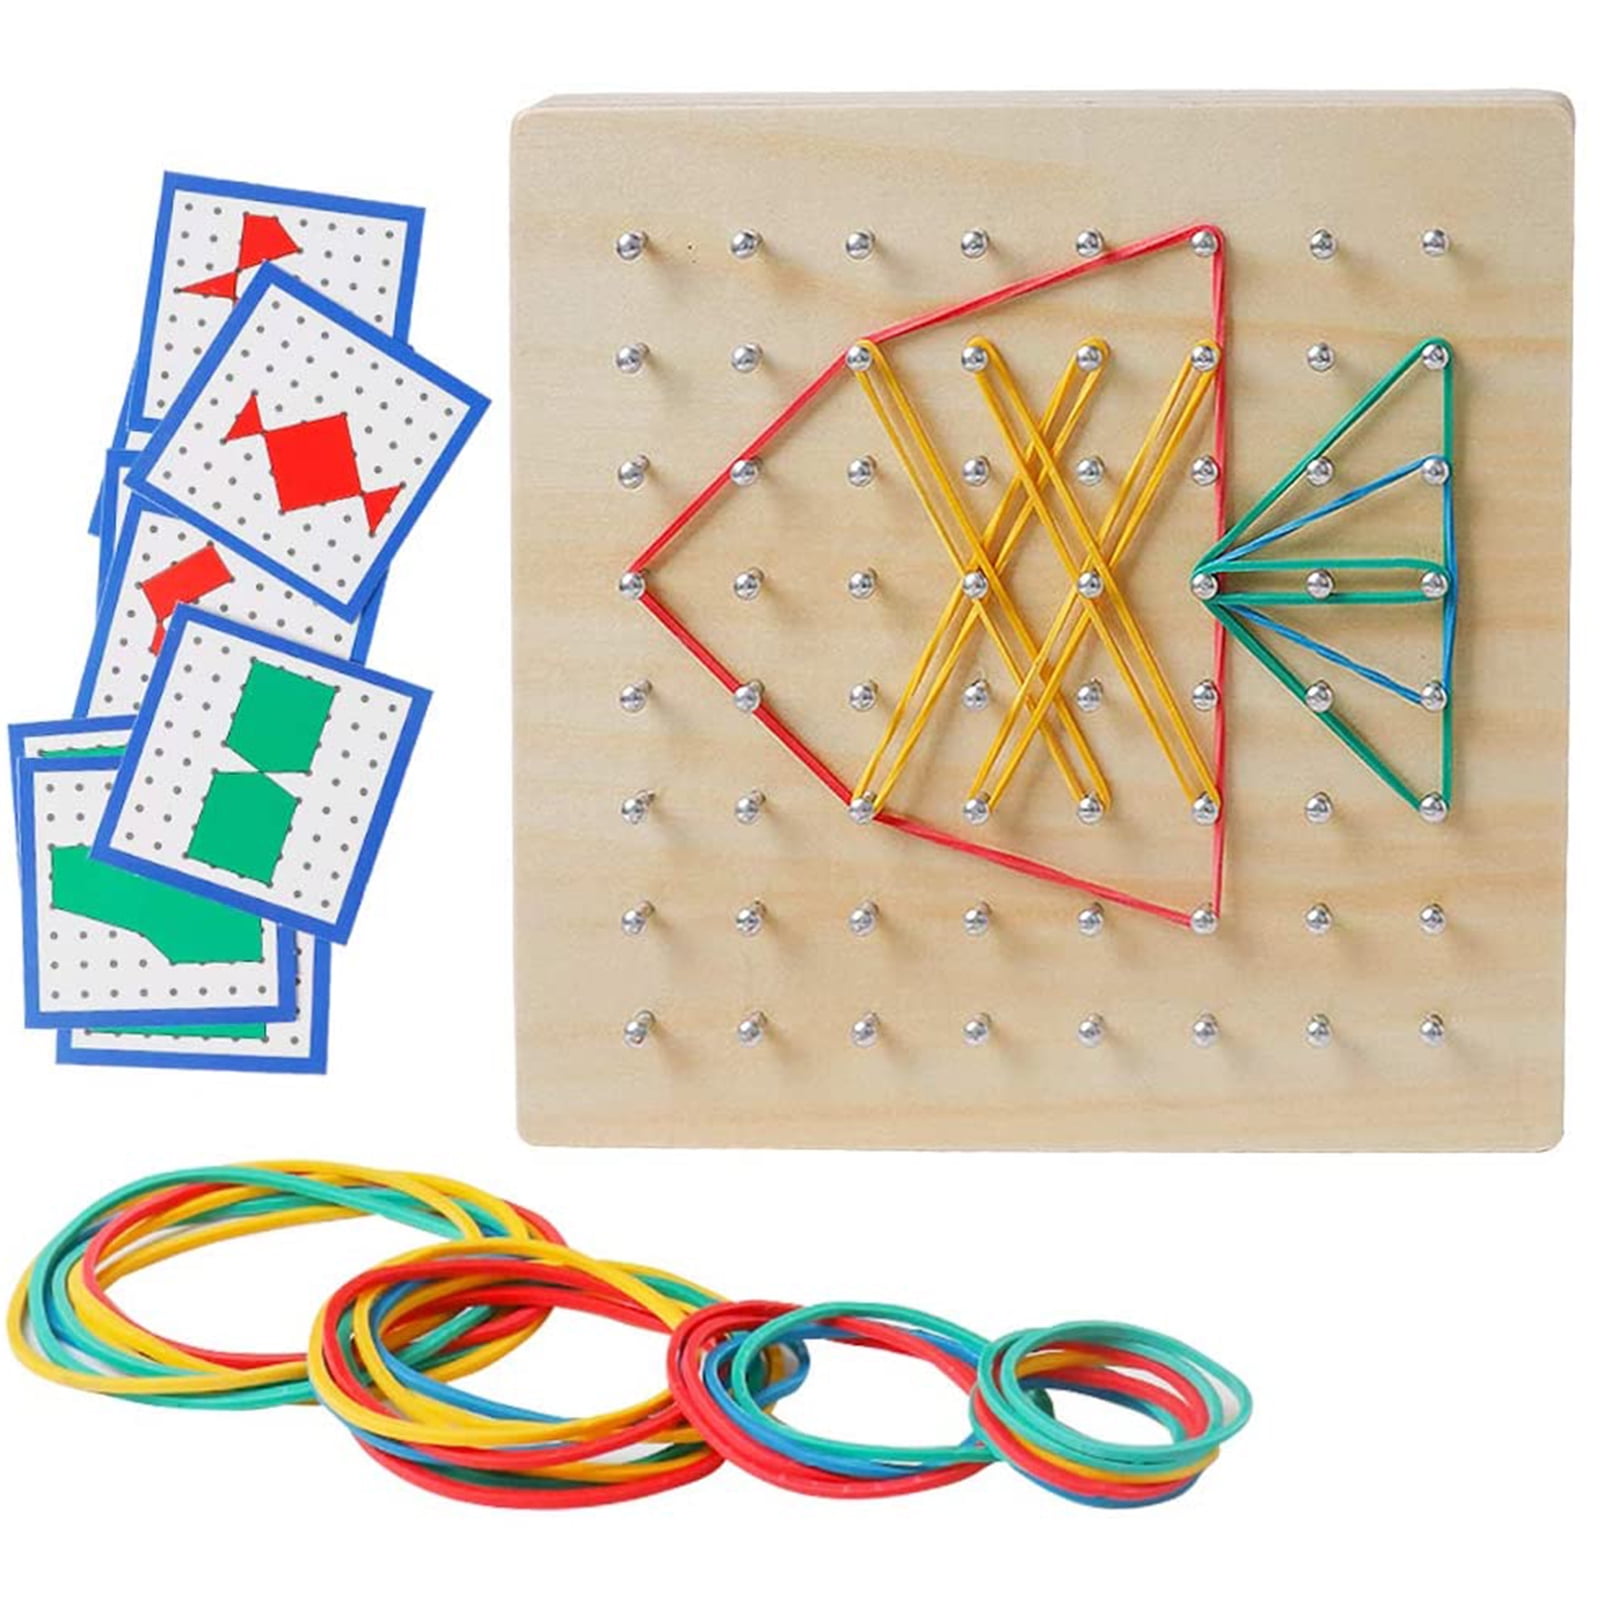  Oopsu 8 Pack Plastic Mathematical Manipulative Material Array  Block Geo Board with 80 Latex Bands for Kids(4 Colors) : Toys & Games